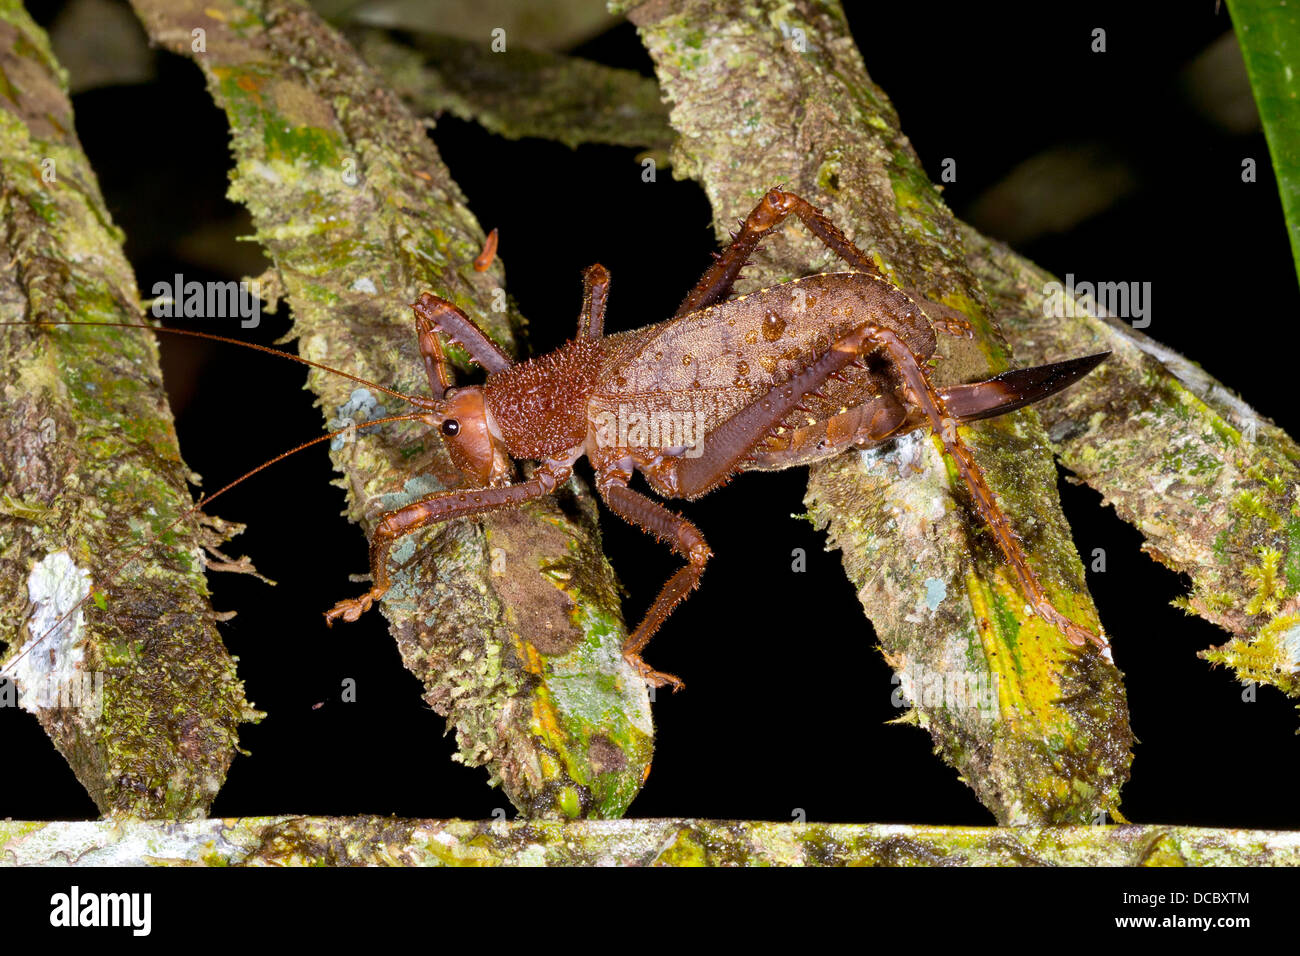 A female giant bush cricket on a textured mossy palm leaf in the rainforest understory at night, Ecuador Stock Photo